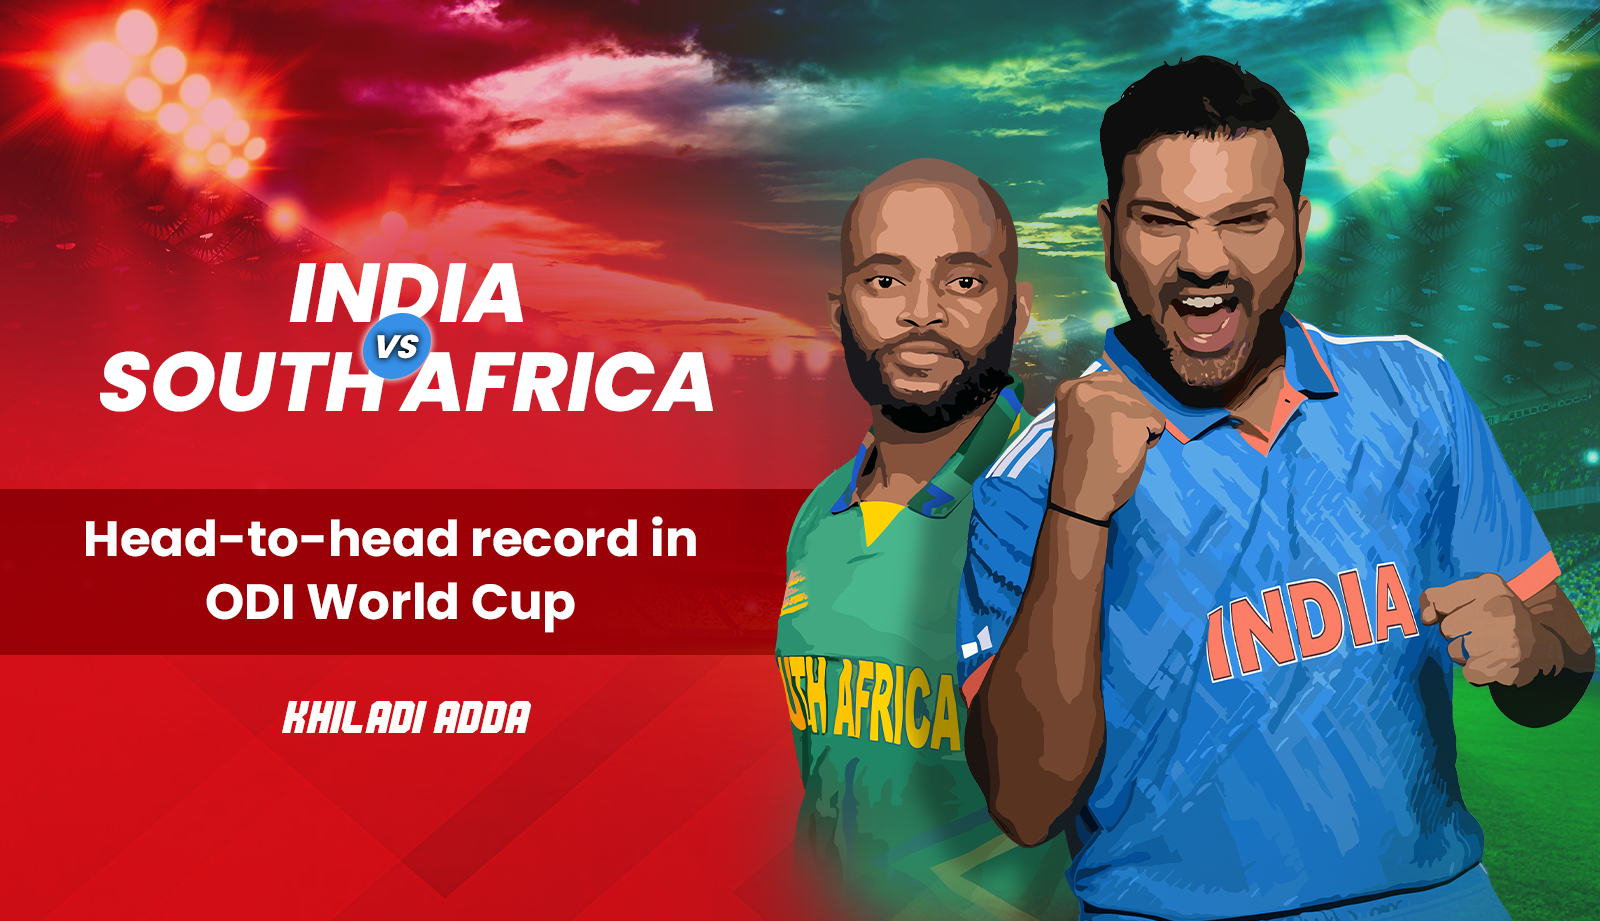 Will India secure their place in Semi-Final?